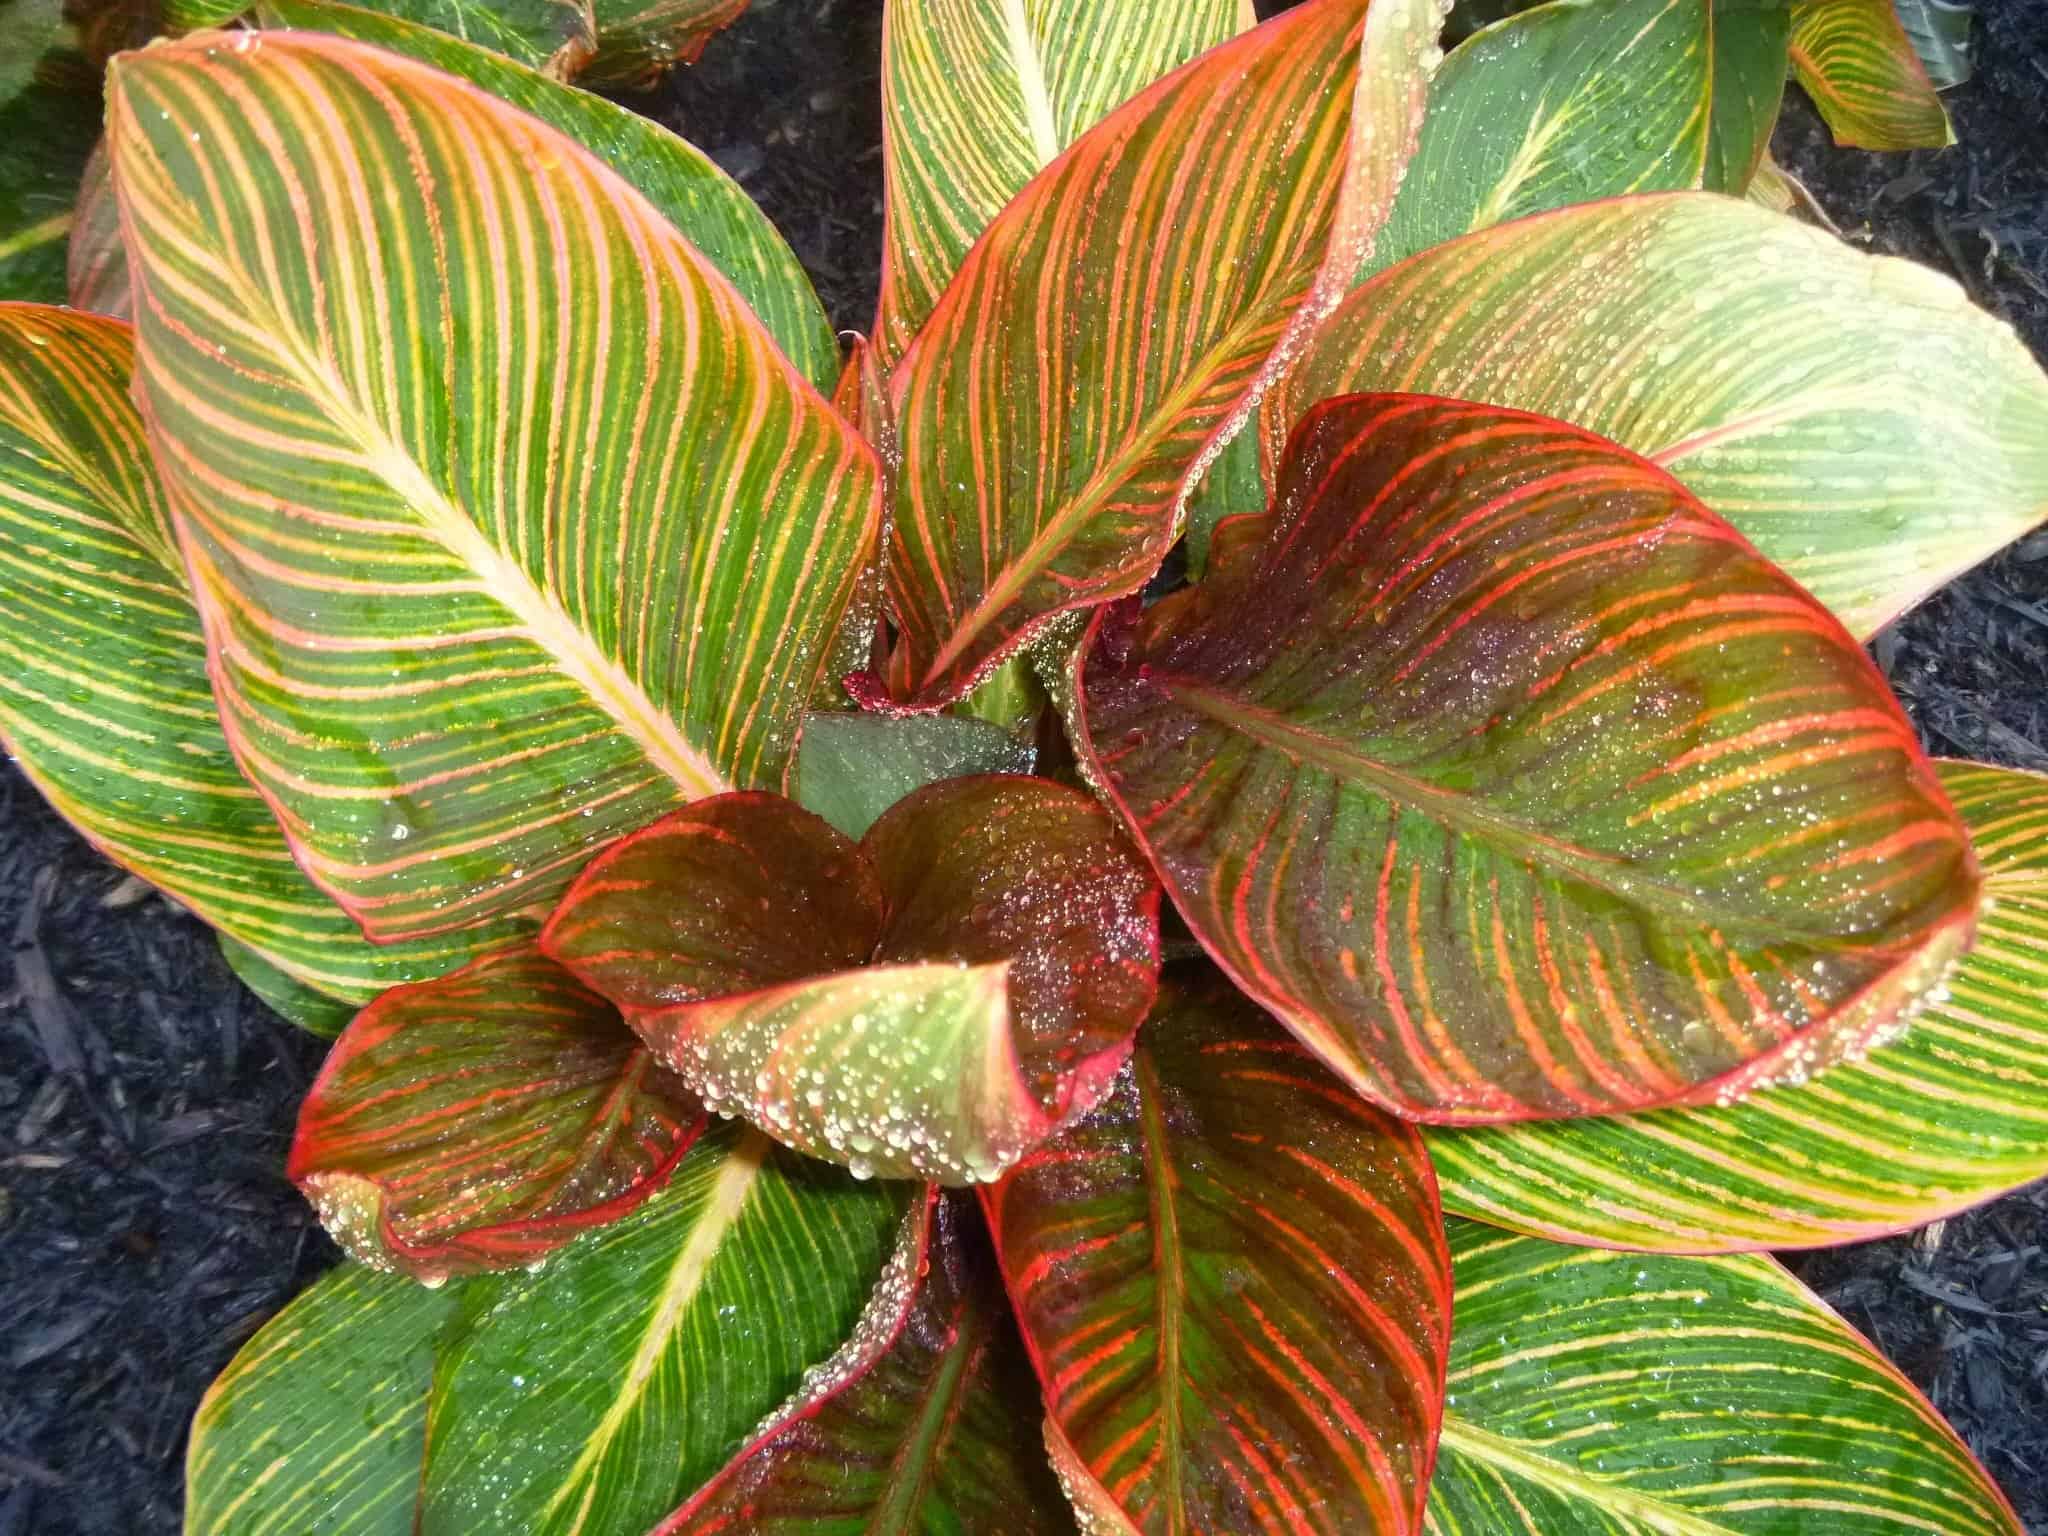 'Pink Sunburst's is a short canna introduced by DECO-Style.